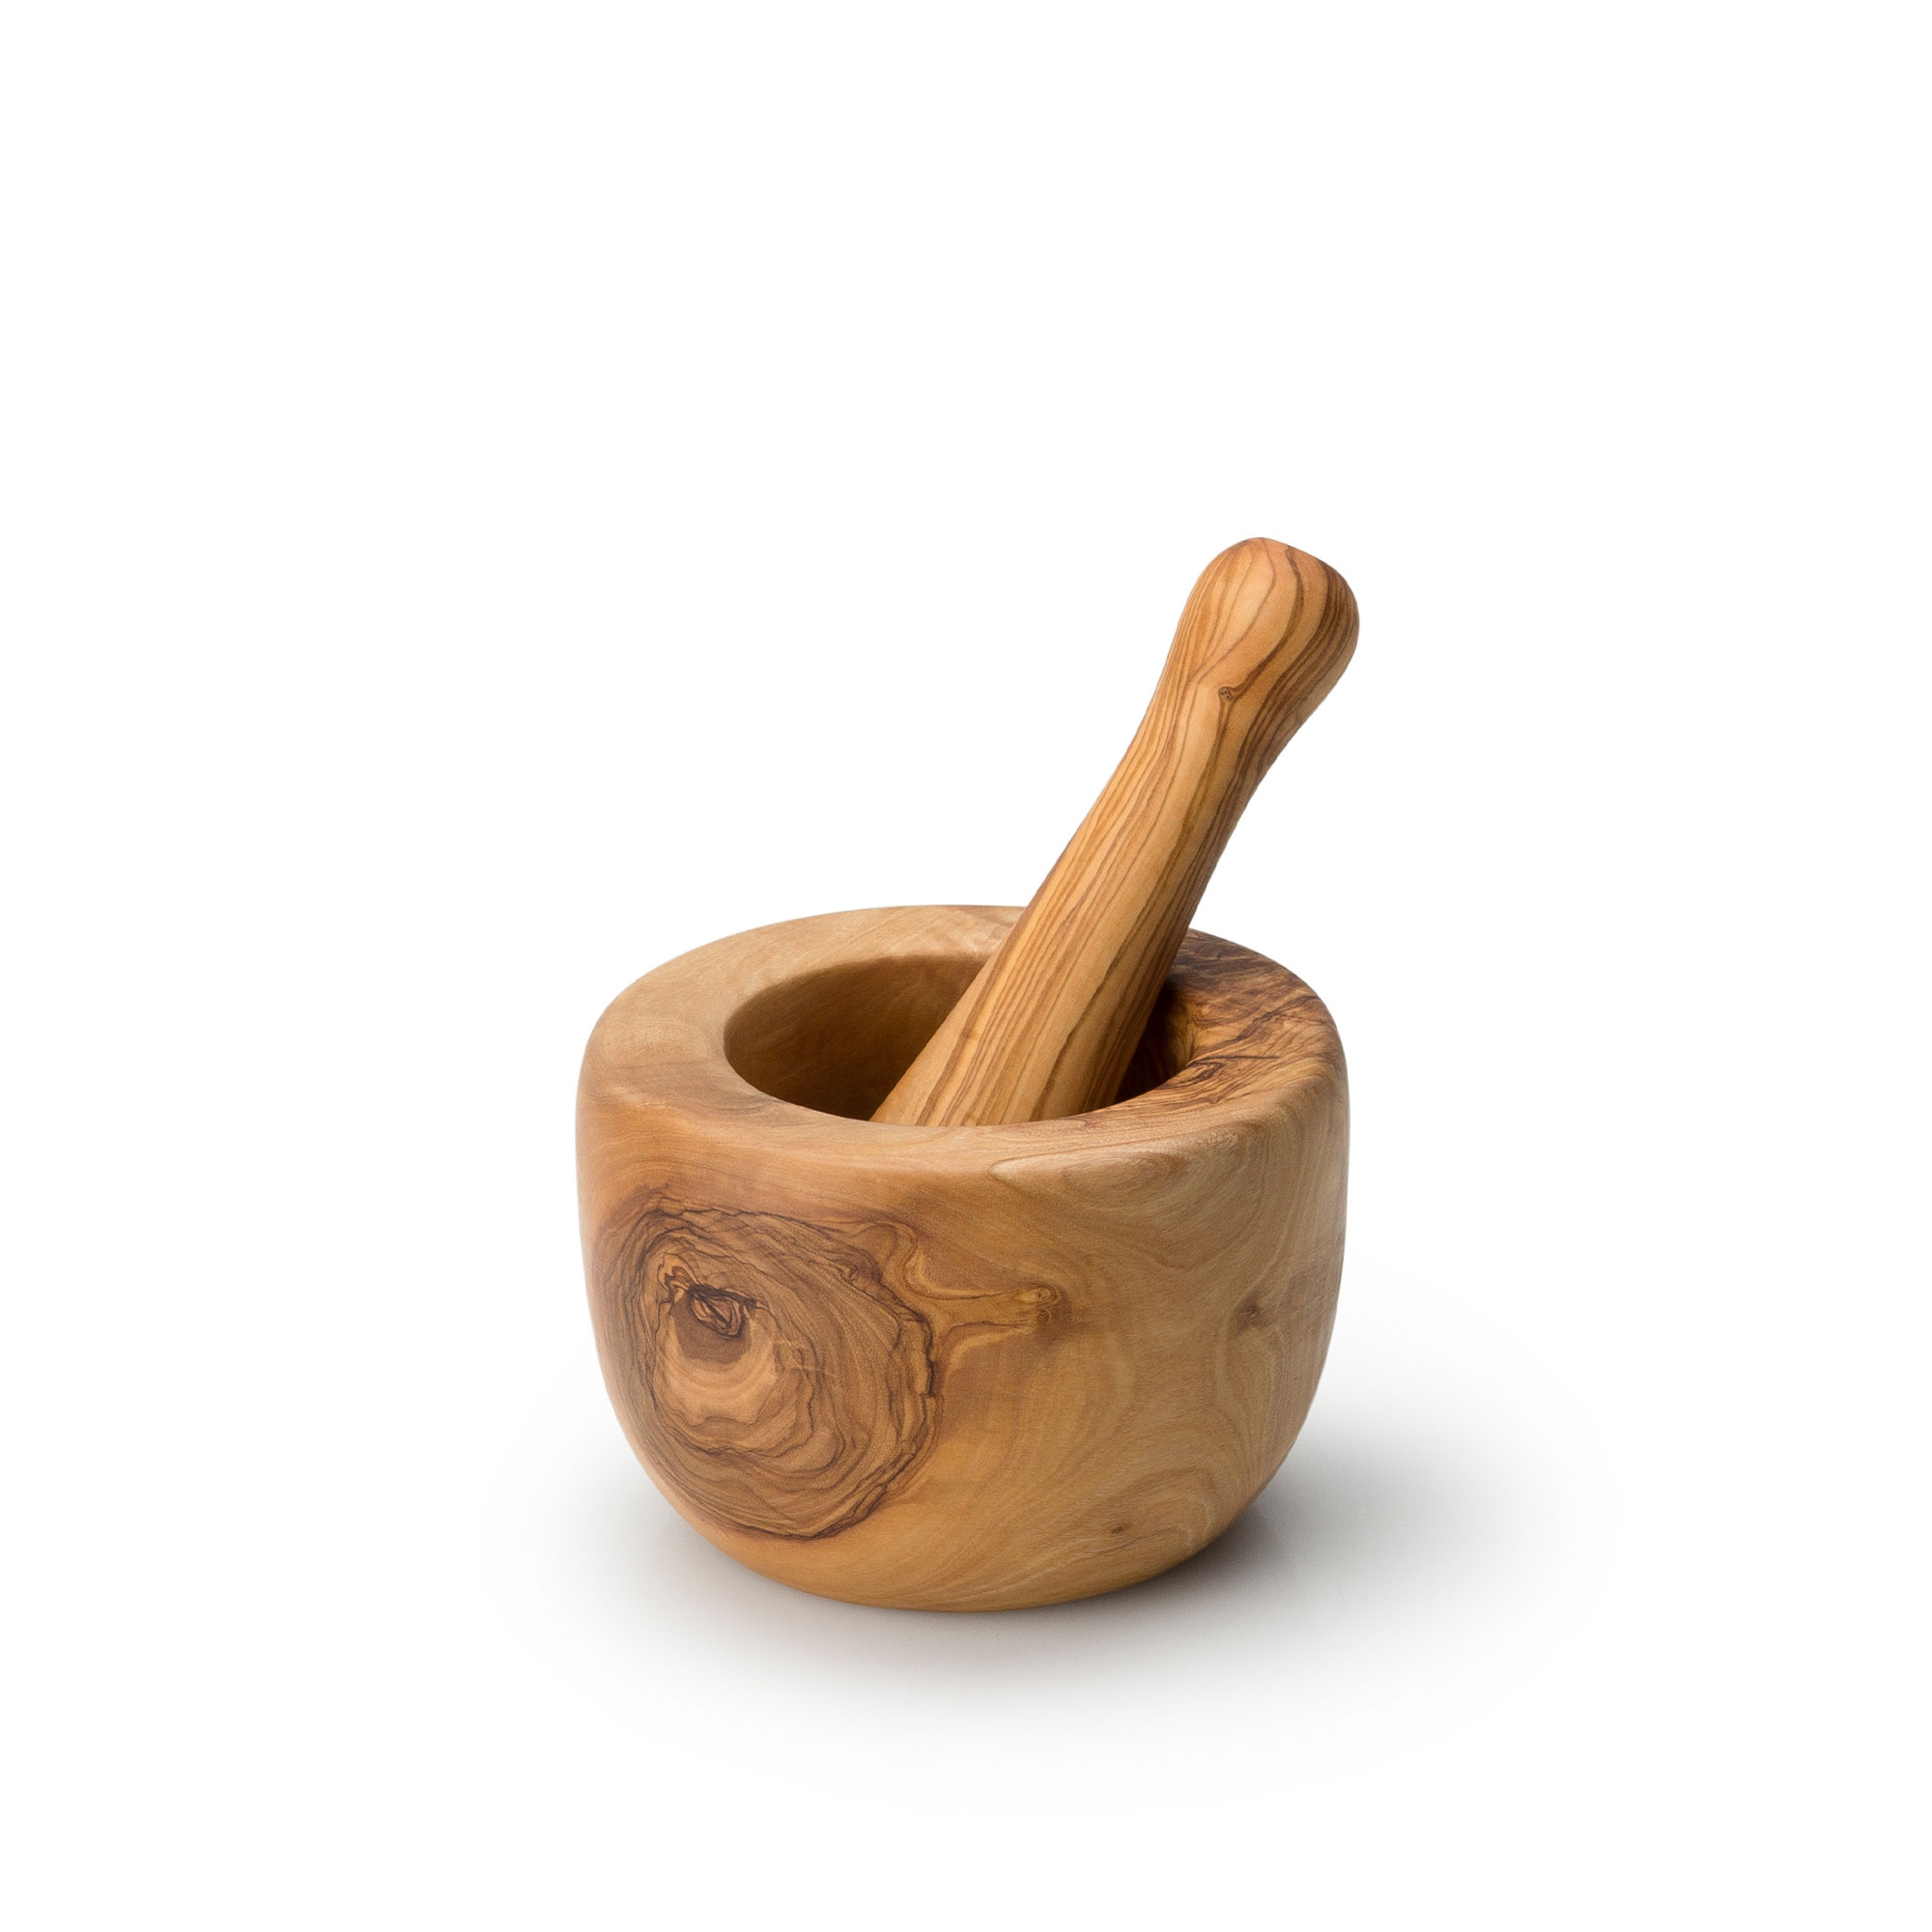 Continenta - Mortar and pestle olive wood